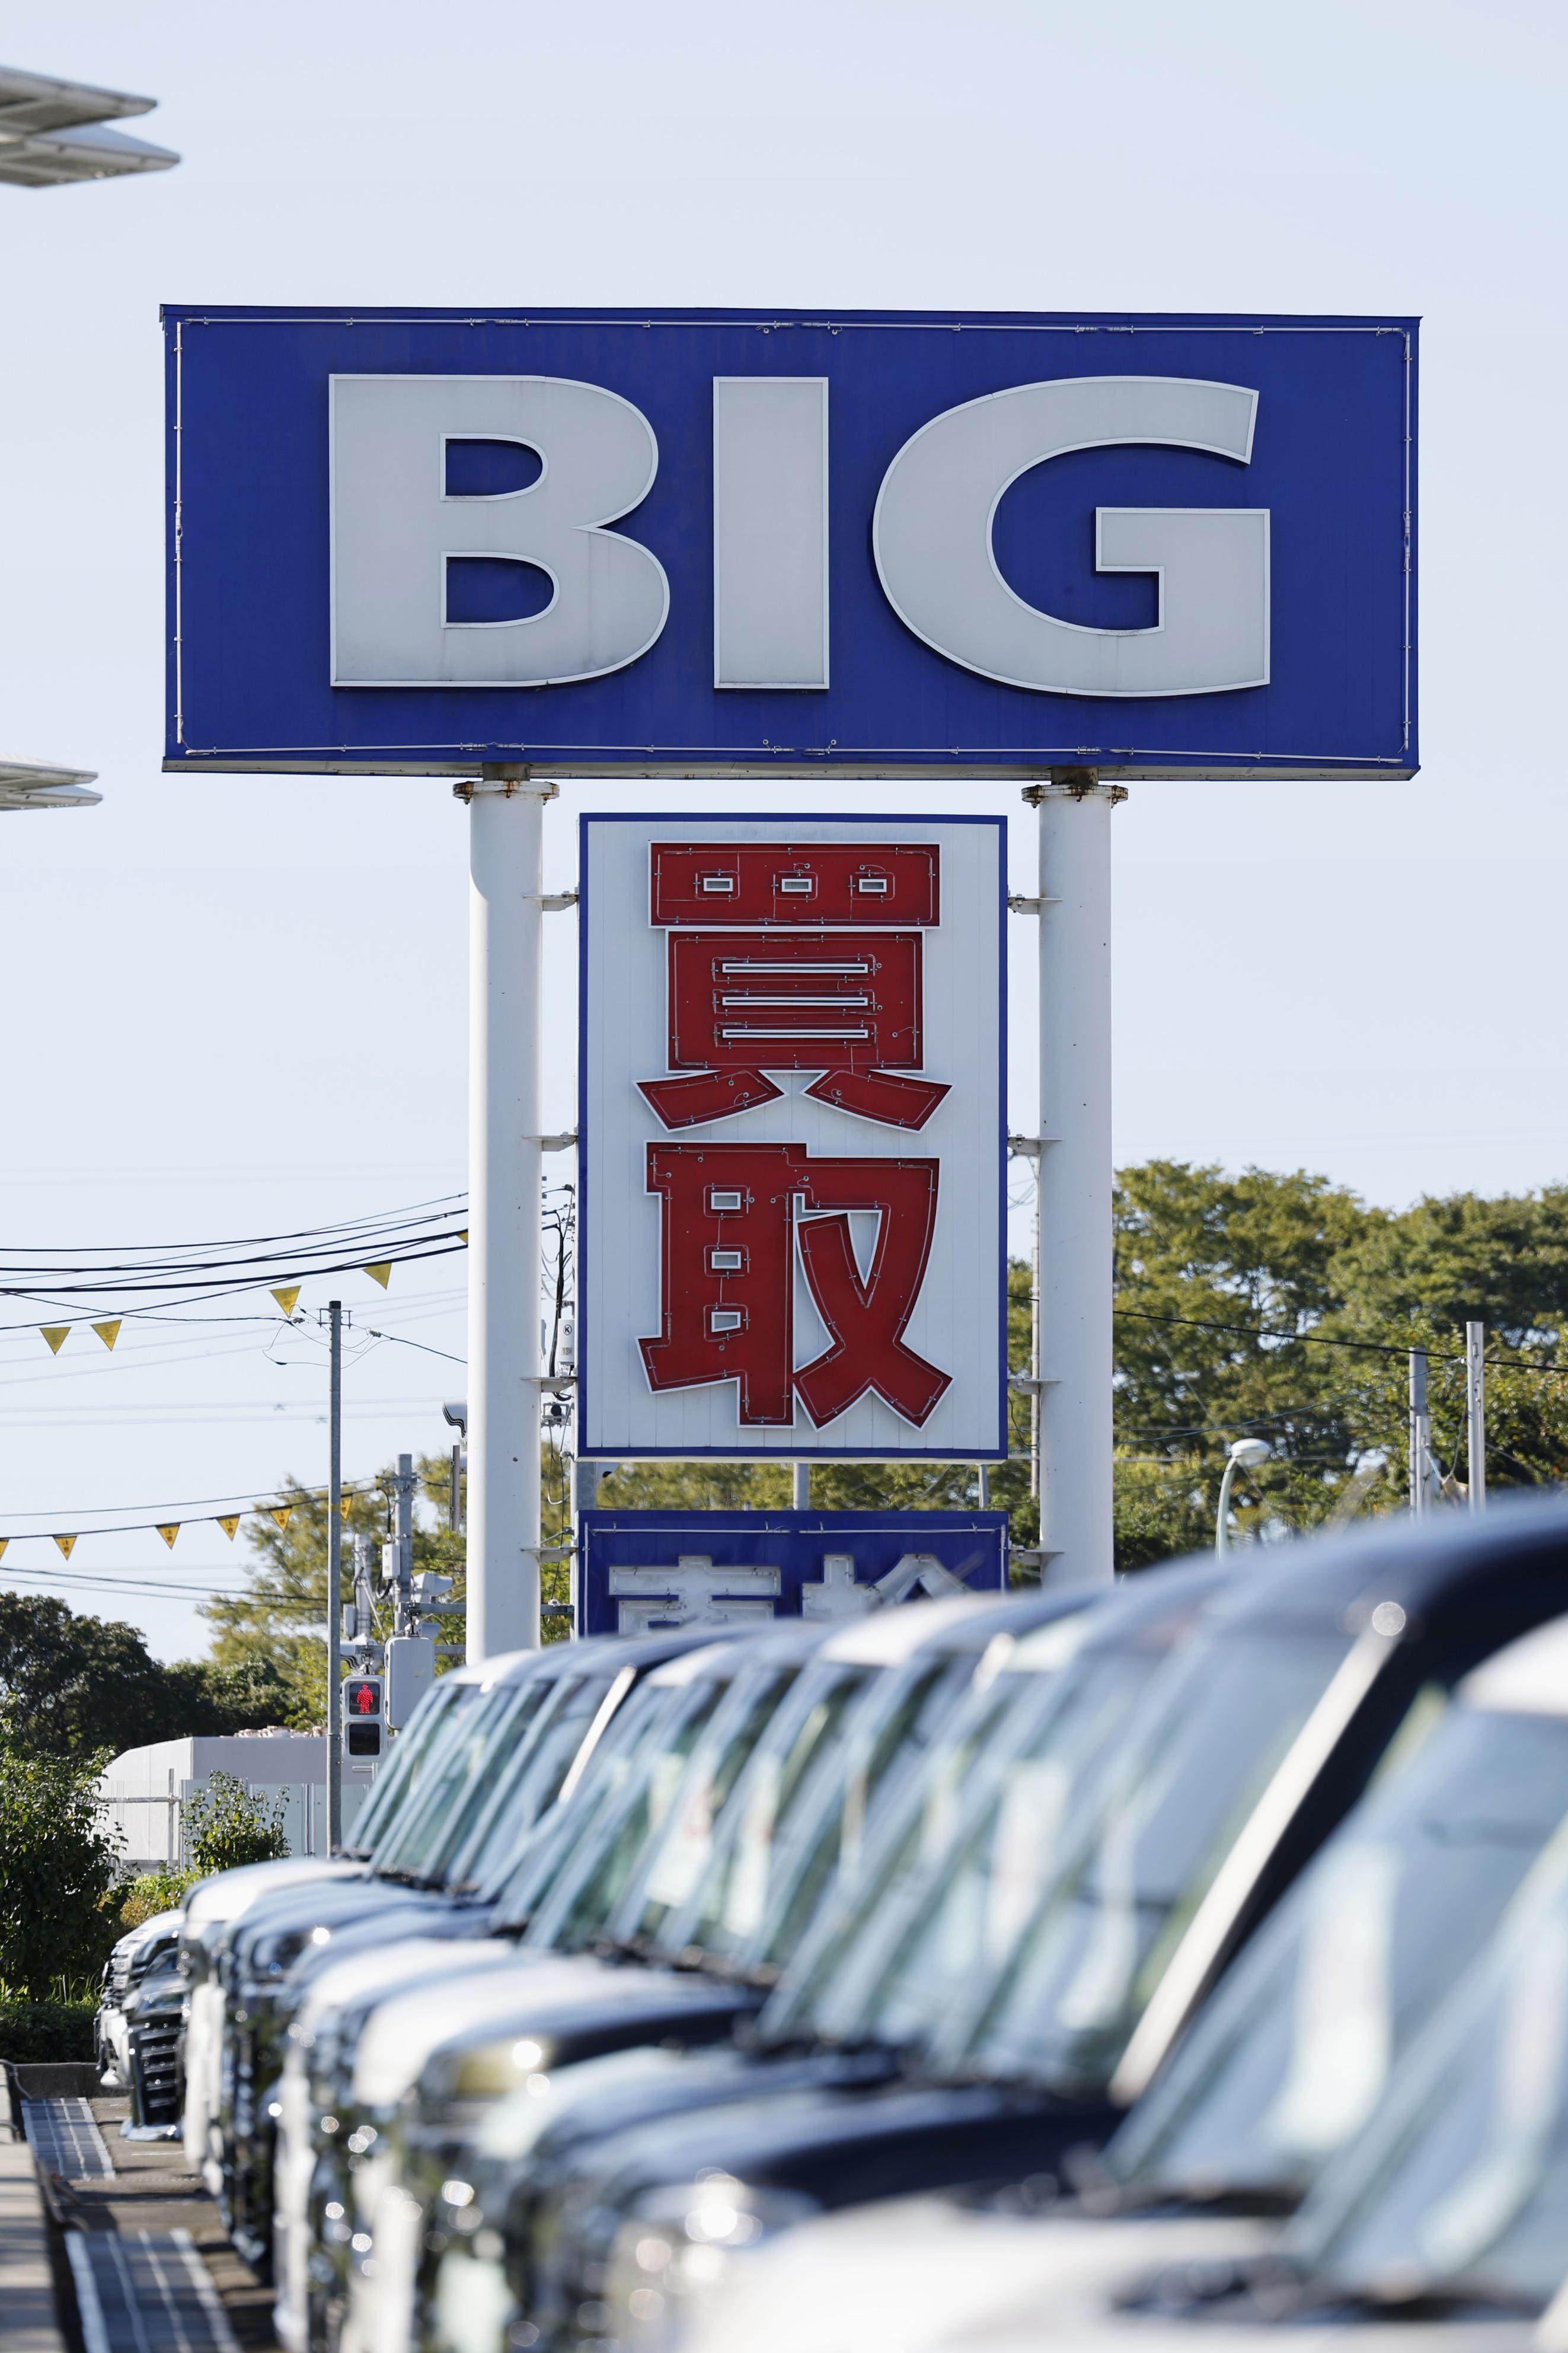 Used cars are seen for sale in Japan. The sanctions have driven down prices for second-hand cars in Japan and left brokers scrambling to send vehicles to other regions. Photo: Kyodo